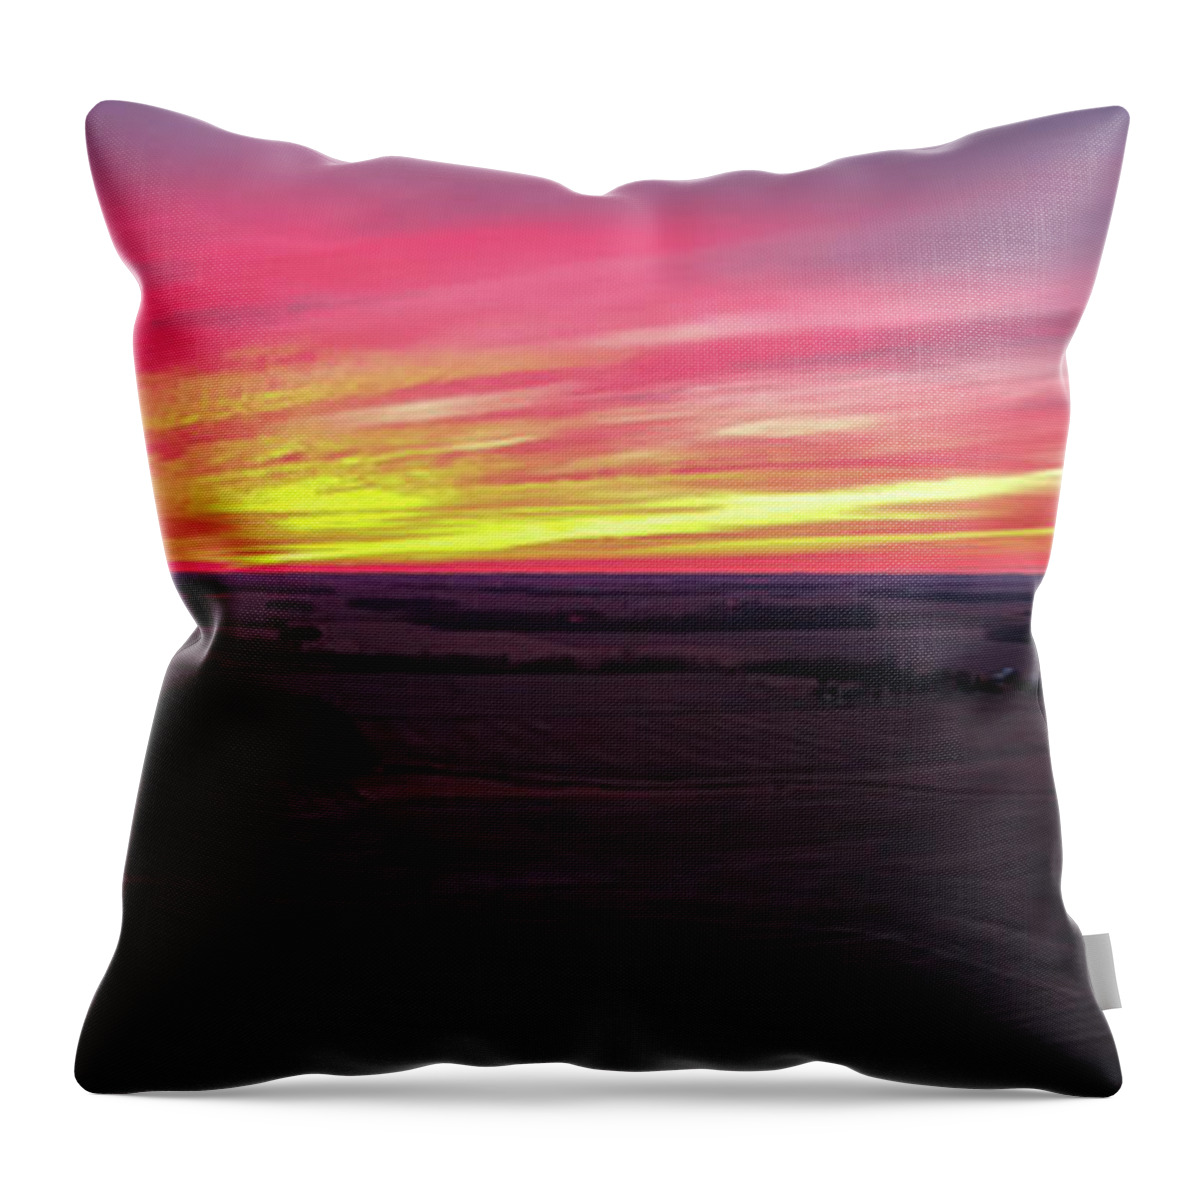  Throw Pillow featuring the photograph Sunset #5 by Brian Jones